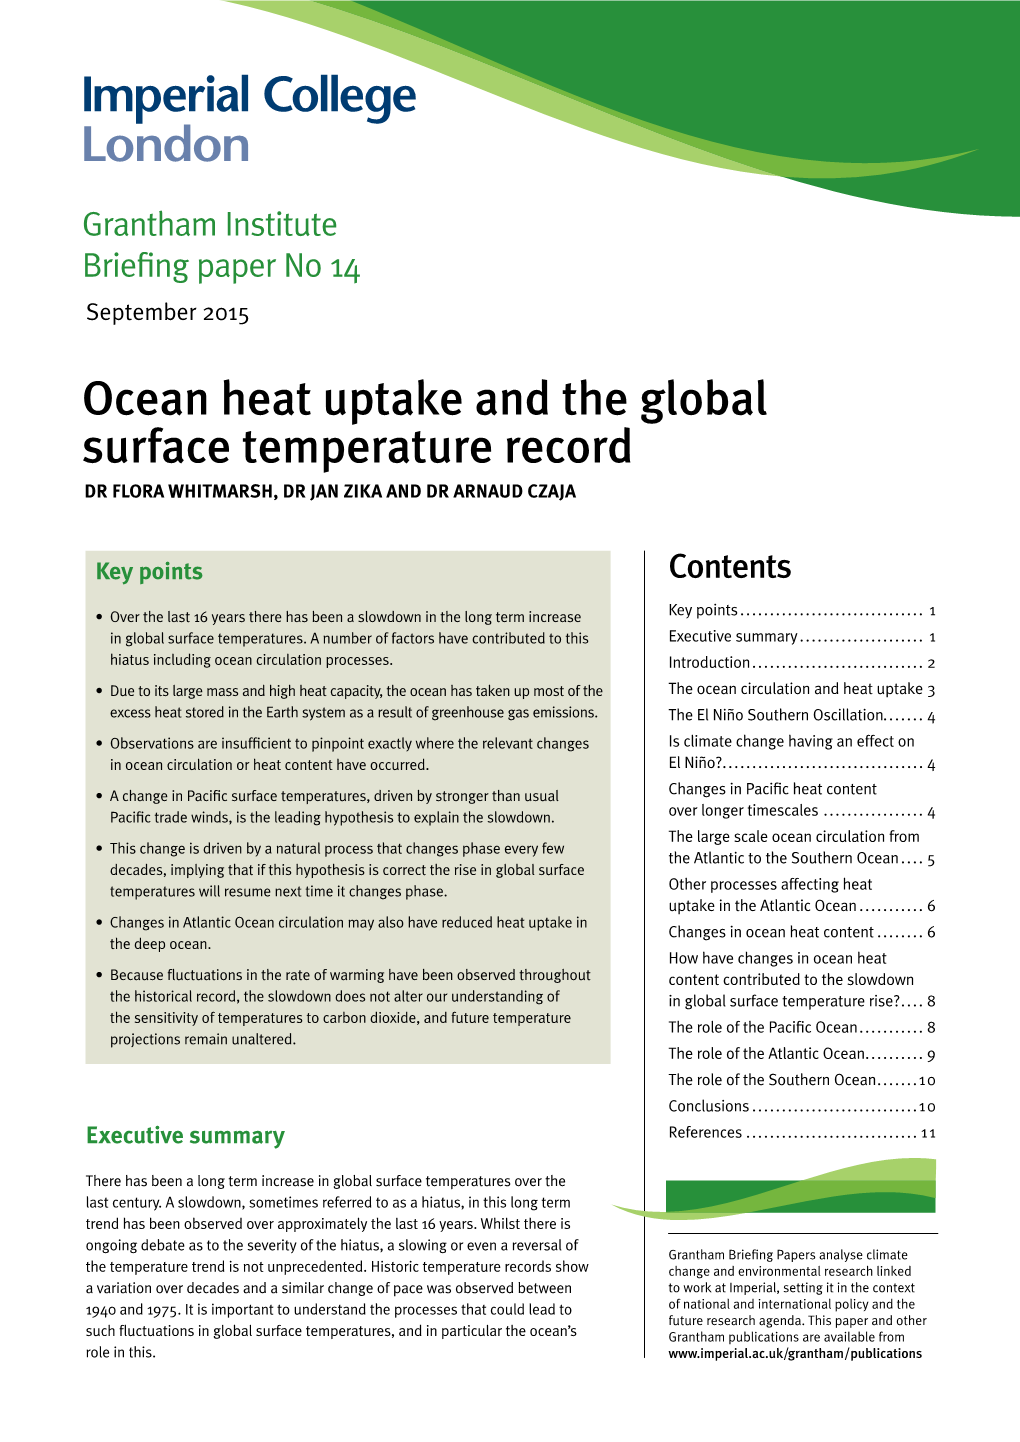 Ocean Heat Uptake and the Global Surface Temperature Record DR FLORA WHITMARSH, DR JAN ZIKA and DR ARNAUD CZAJA